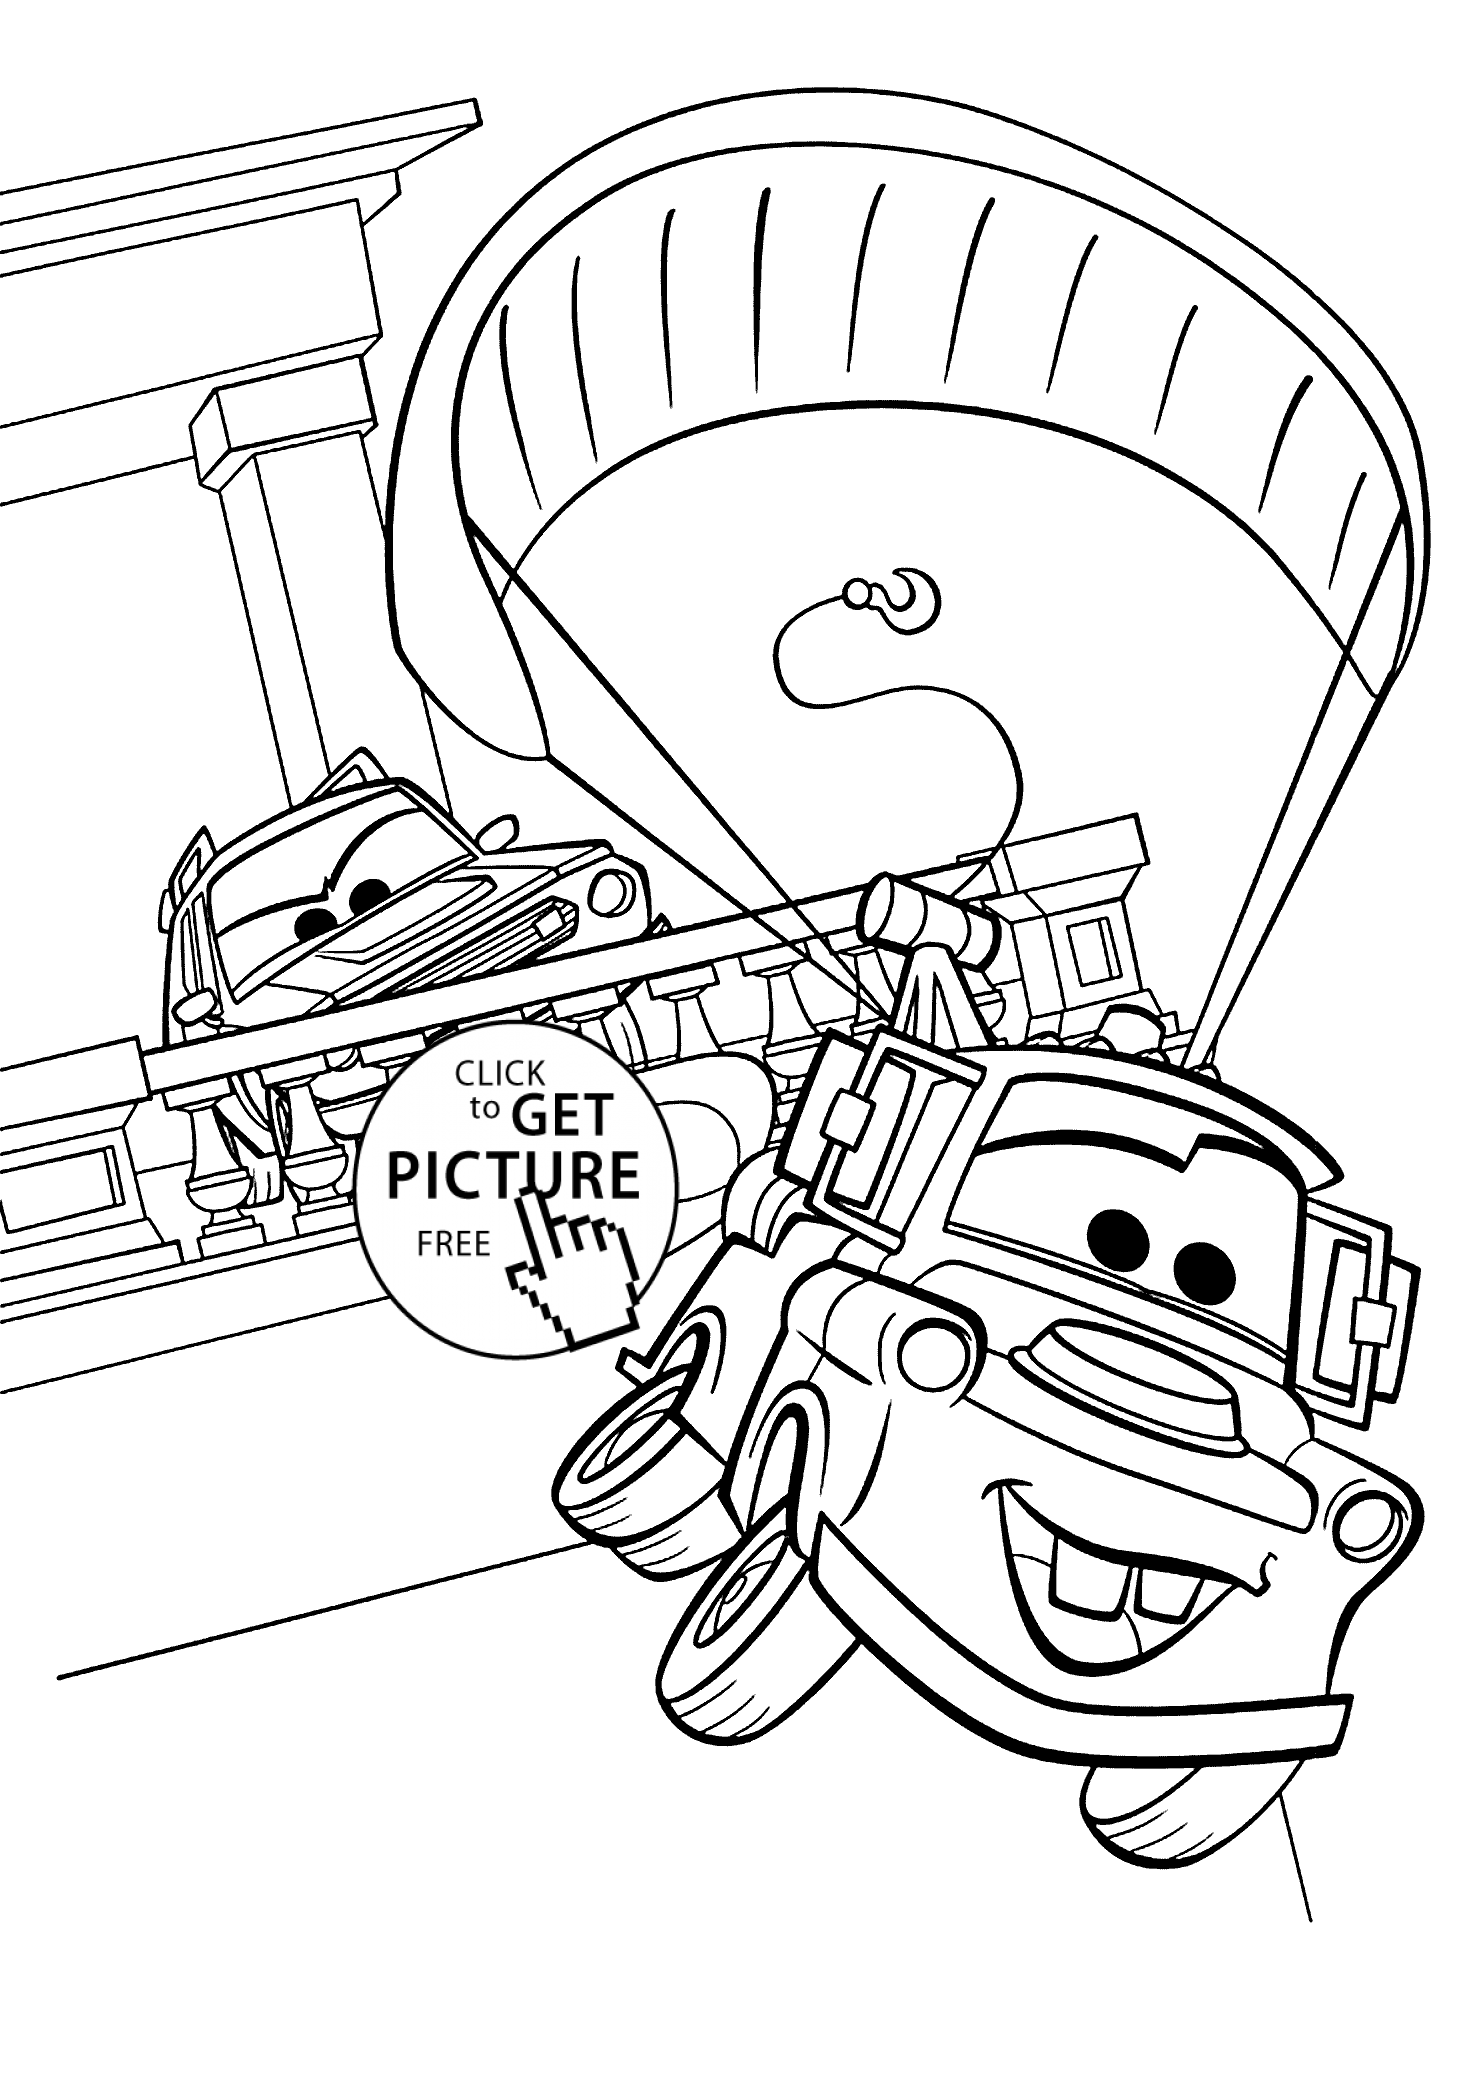 Mater Cars 2 coloring pages for kids, printable free | coloing ...